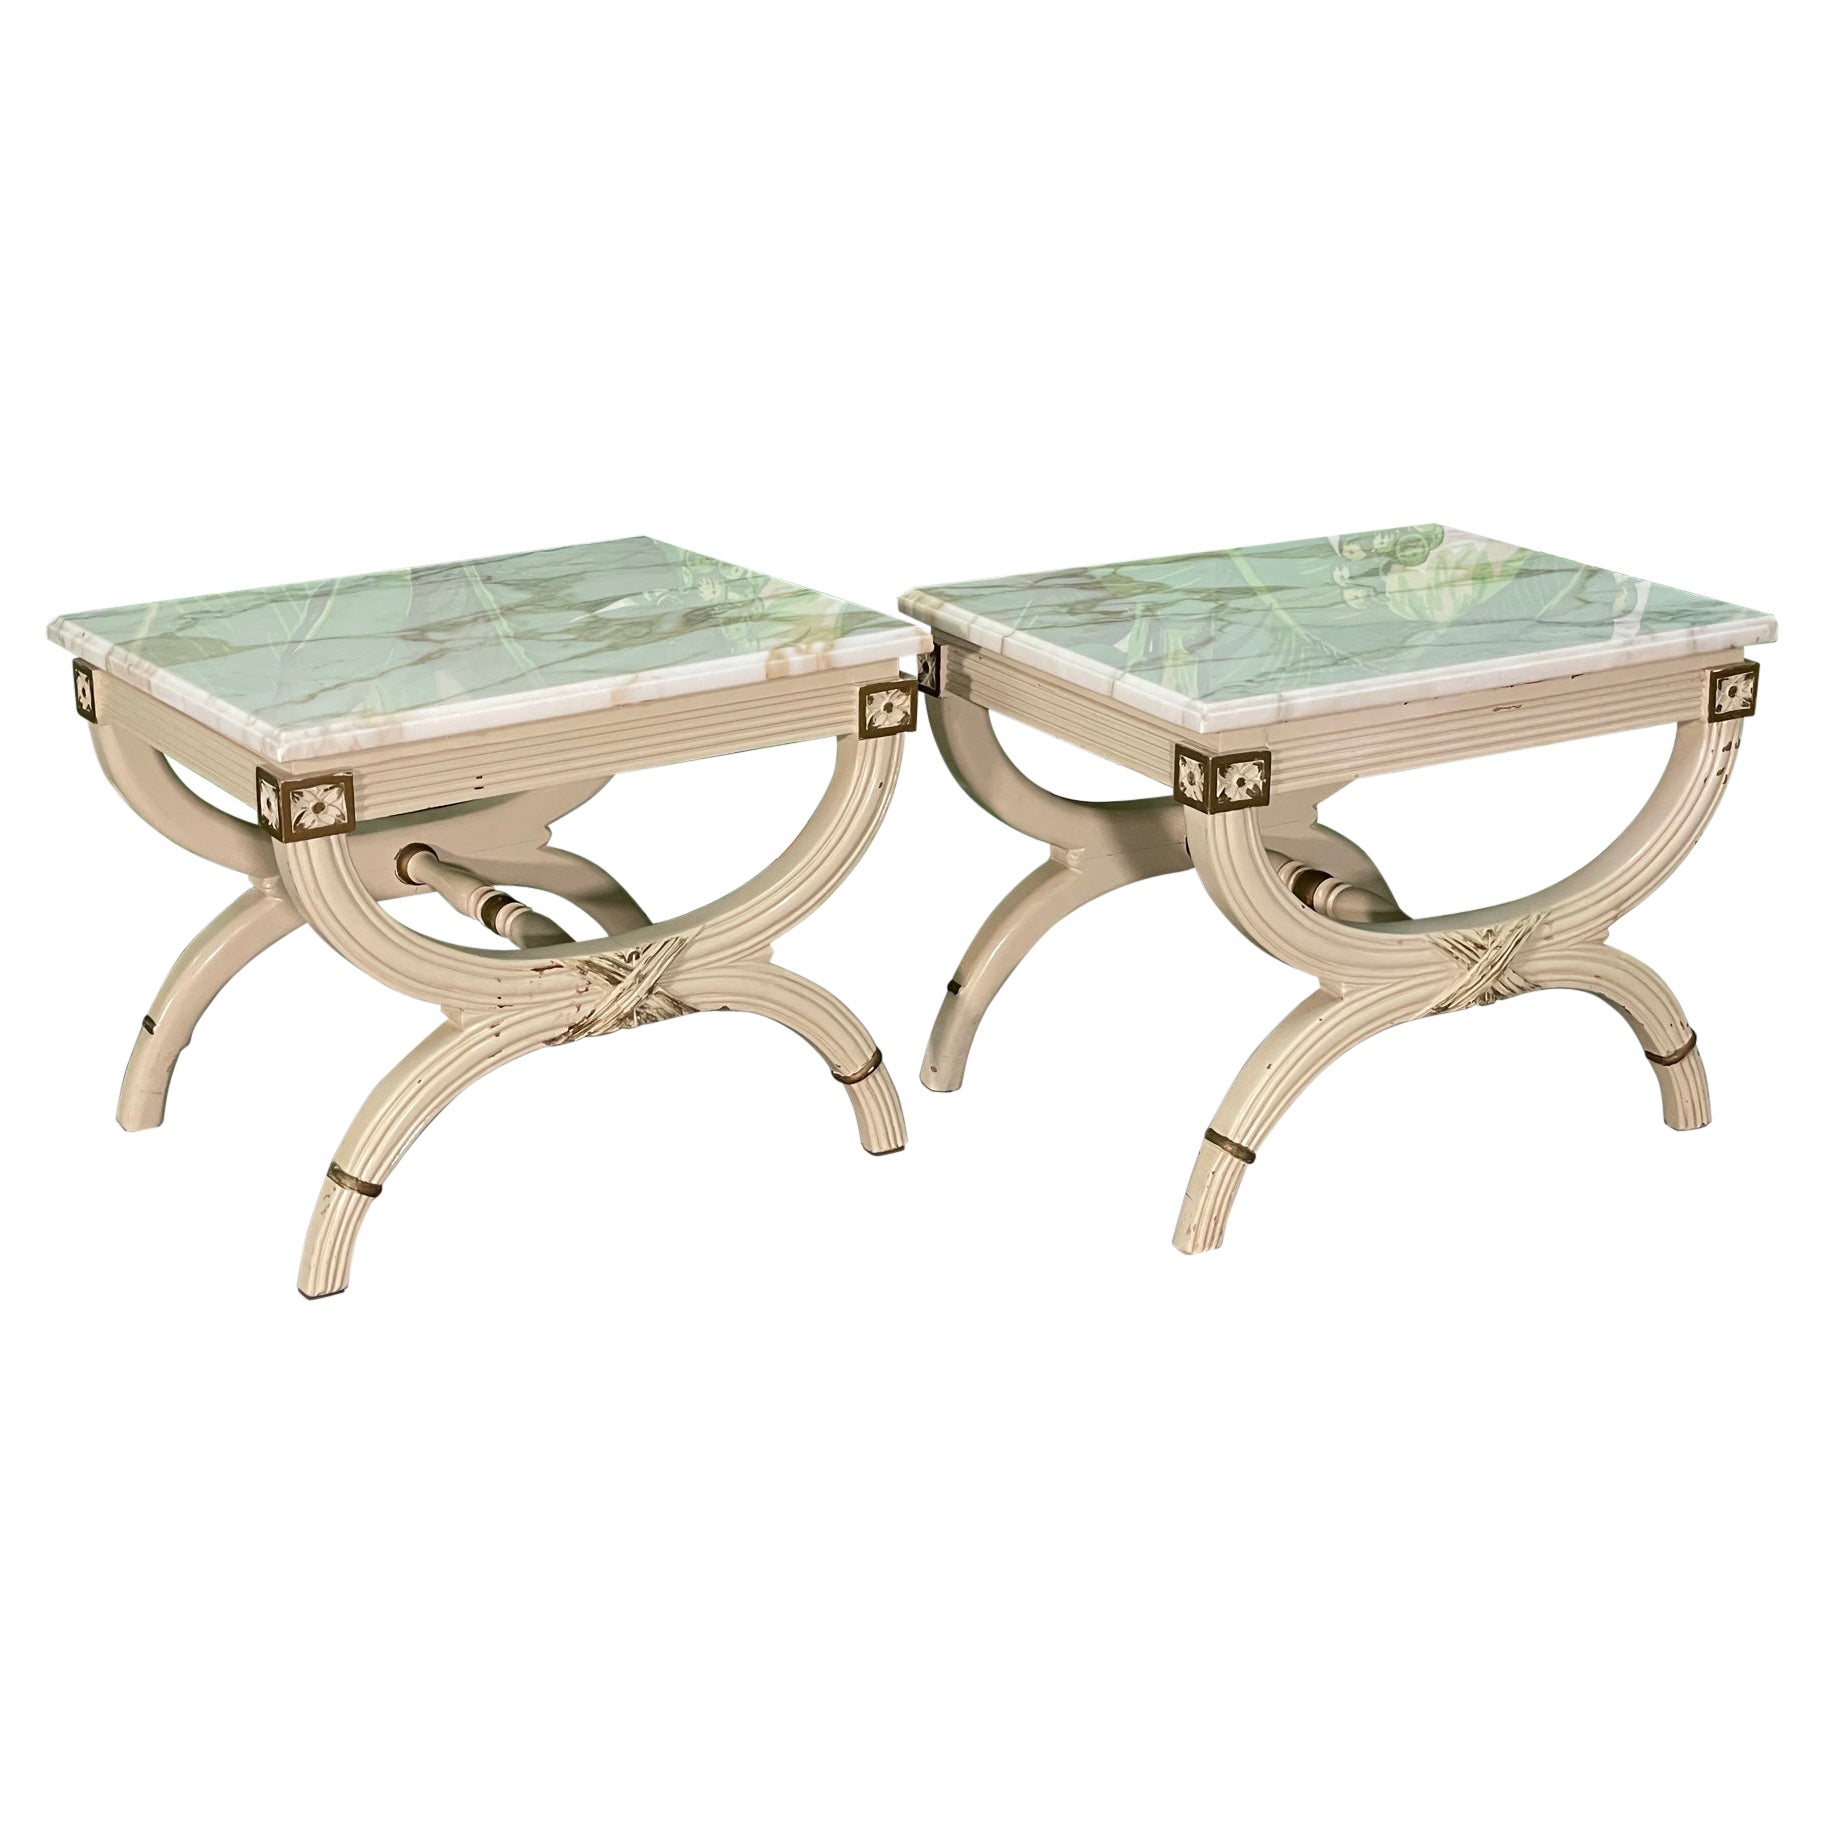 Neoclassical Revival Dorothy Draper Style End Tables or Footstools For Sale